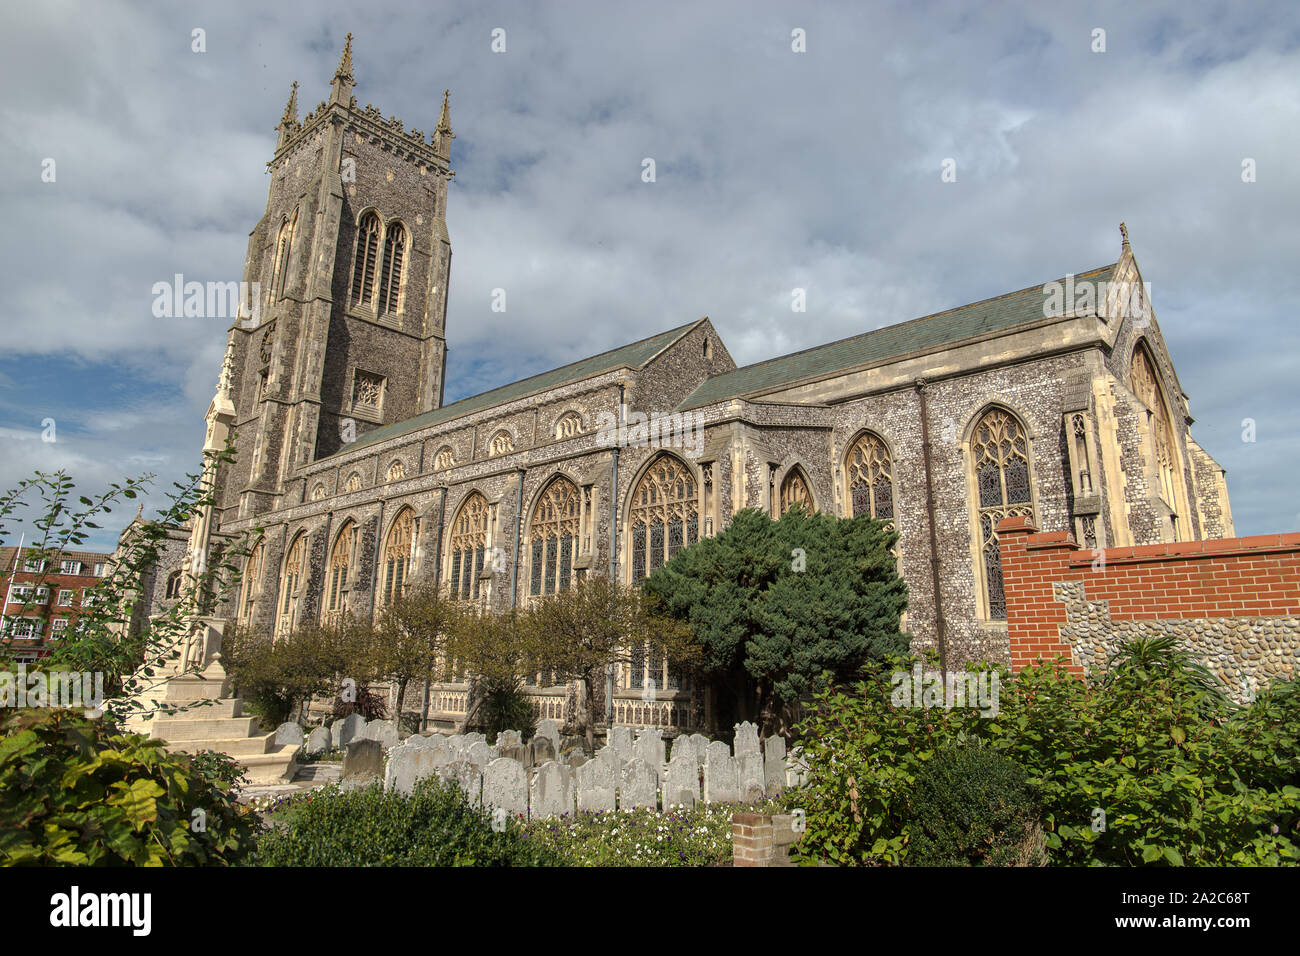 The majestic parrish chuch of St.Peter and St.Paul seen in the North Norfolk town of Cromer, taken on 28th Sept 2019. Stock Photo